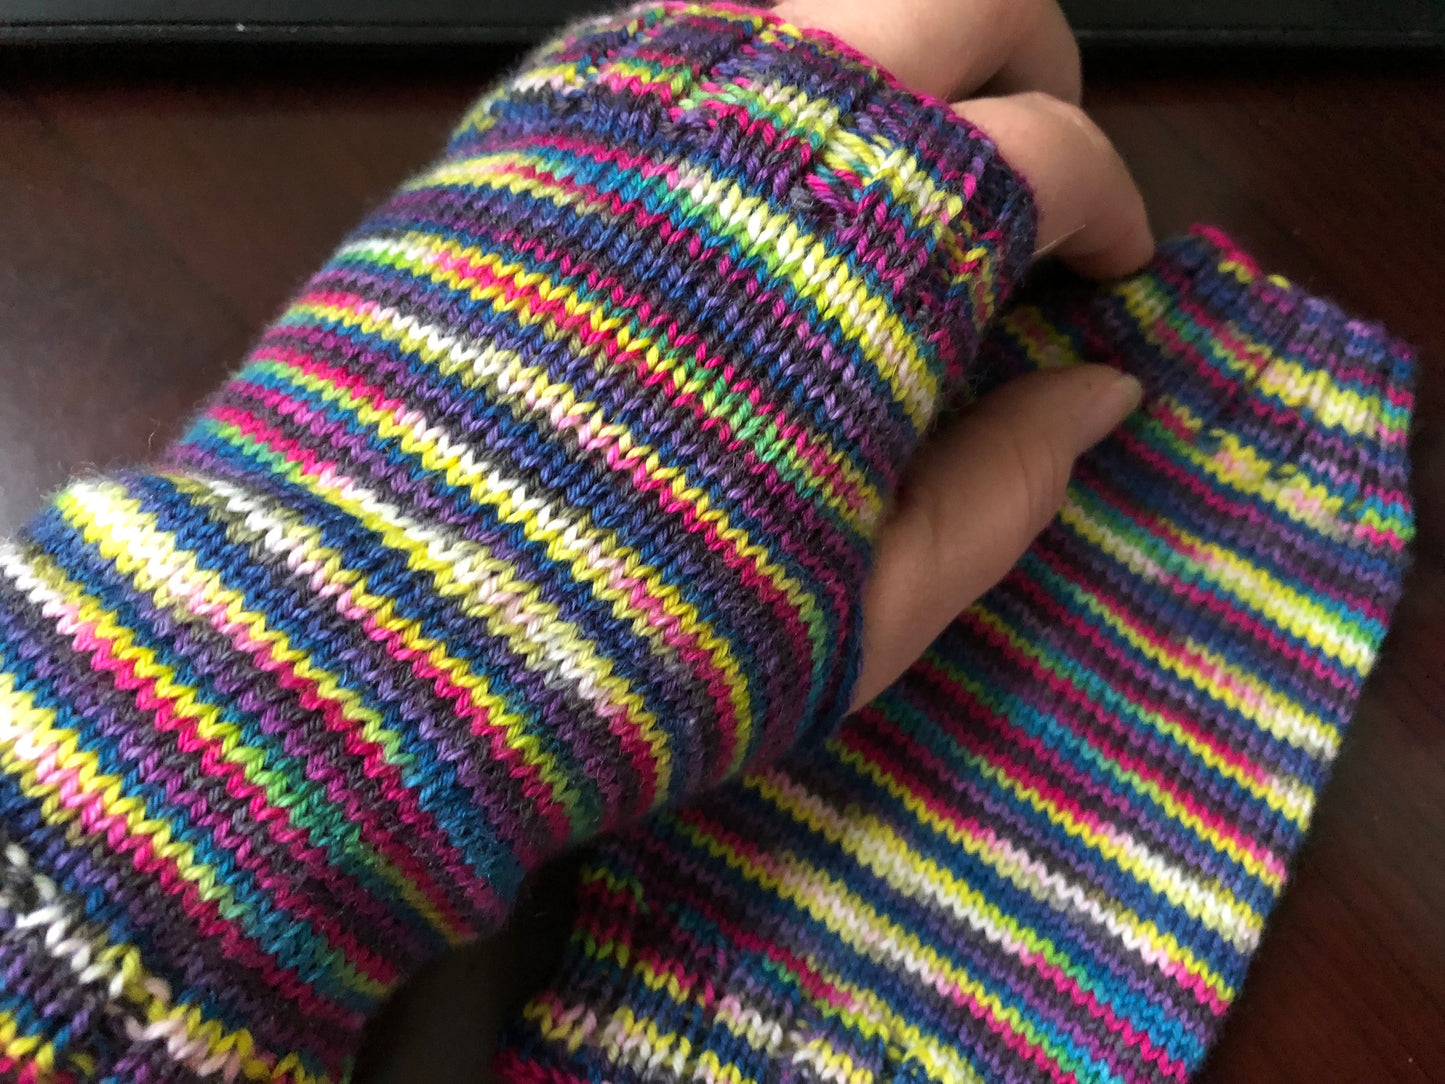 Most Basic Of Mitts Pattern - digital download